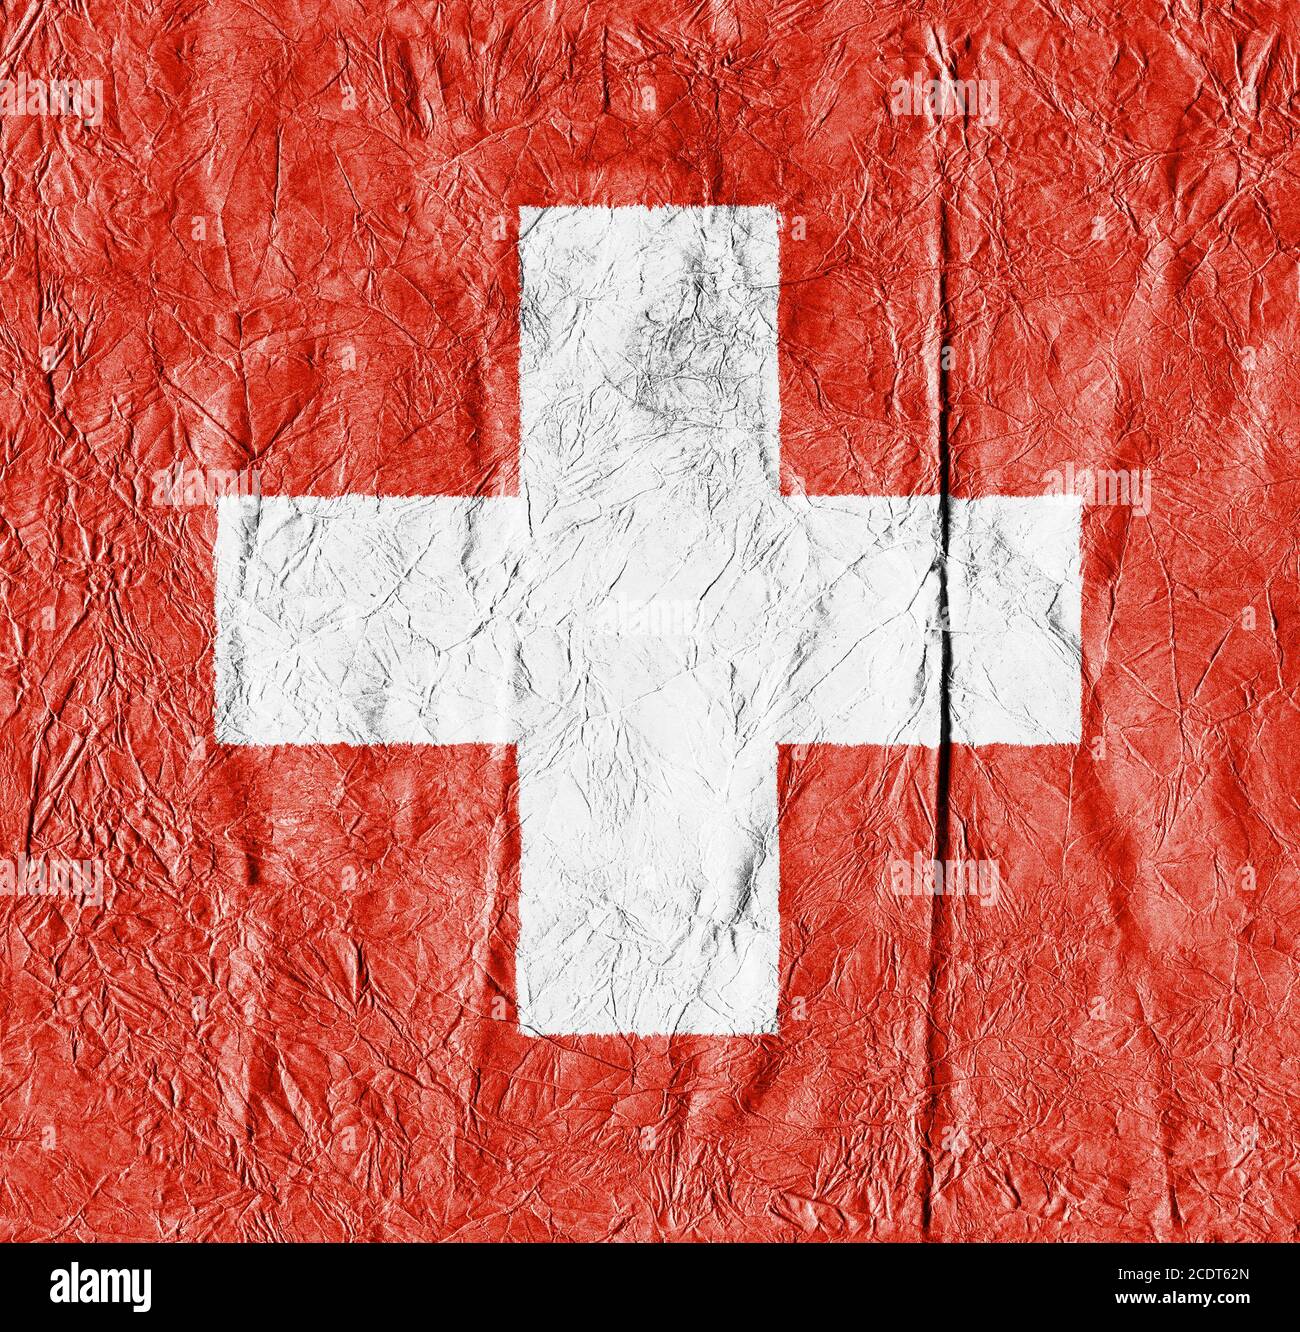 Switzerland flag on a paper in close-up Stock Photo